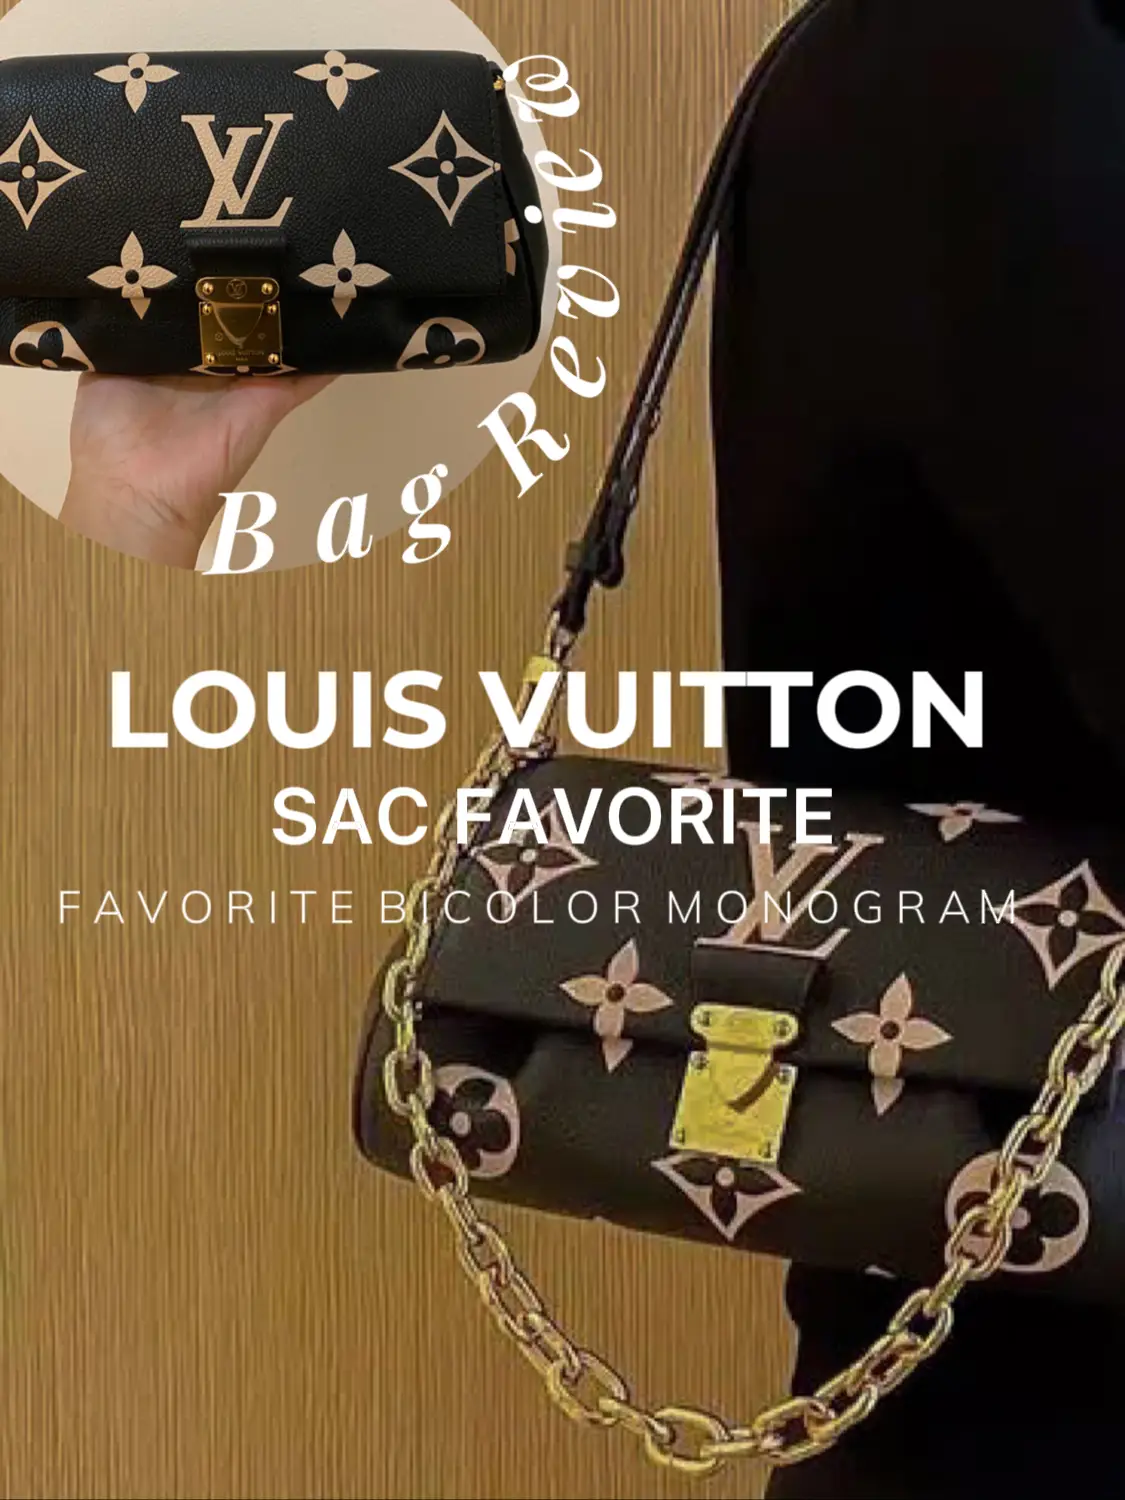 FAVORITE AND MOST USED LOUIS VUITTON BAGS OF 2020, LOUIS VUITTON FAVORITE  SLGs